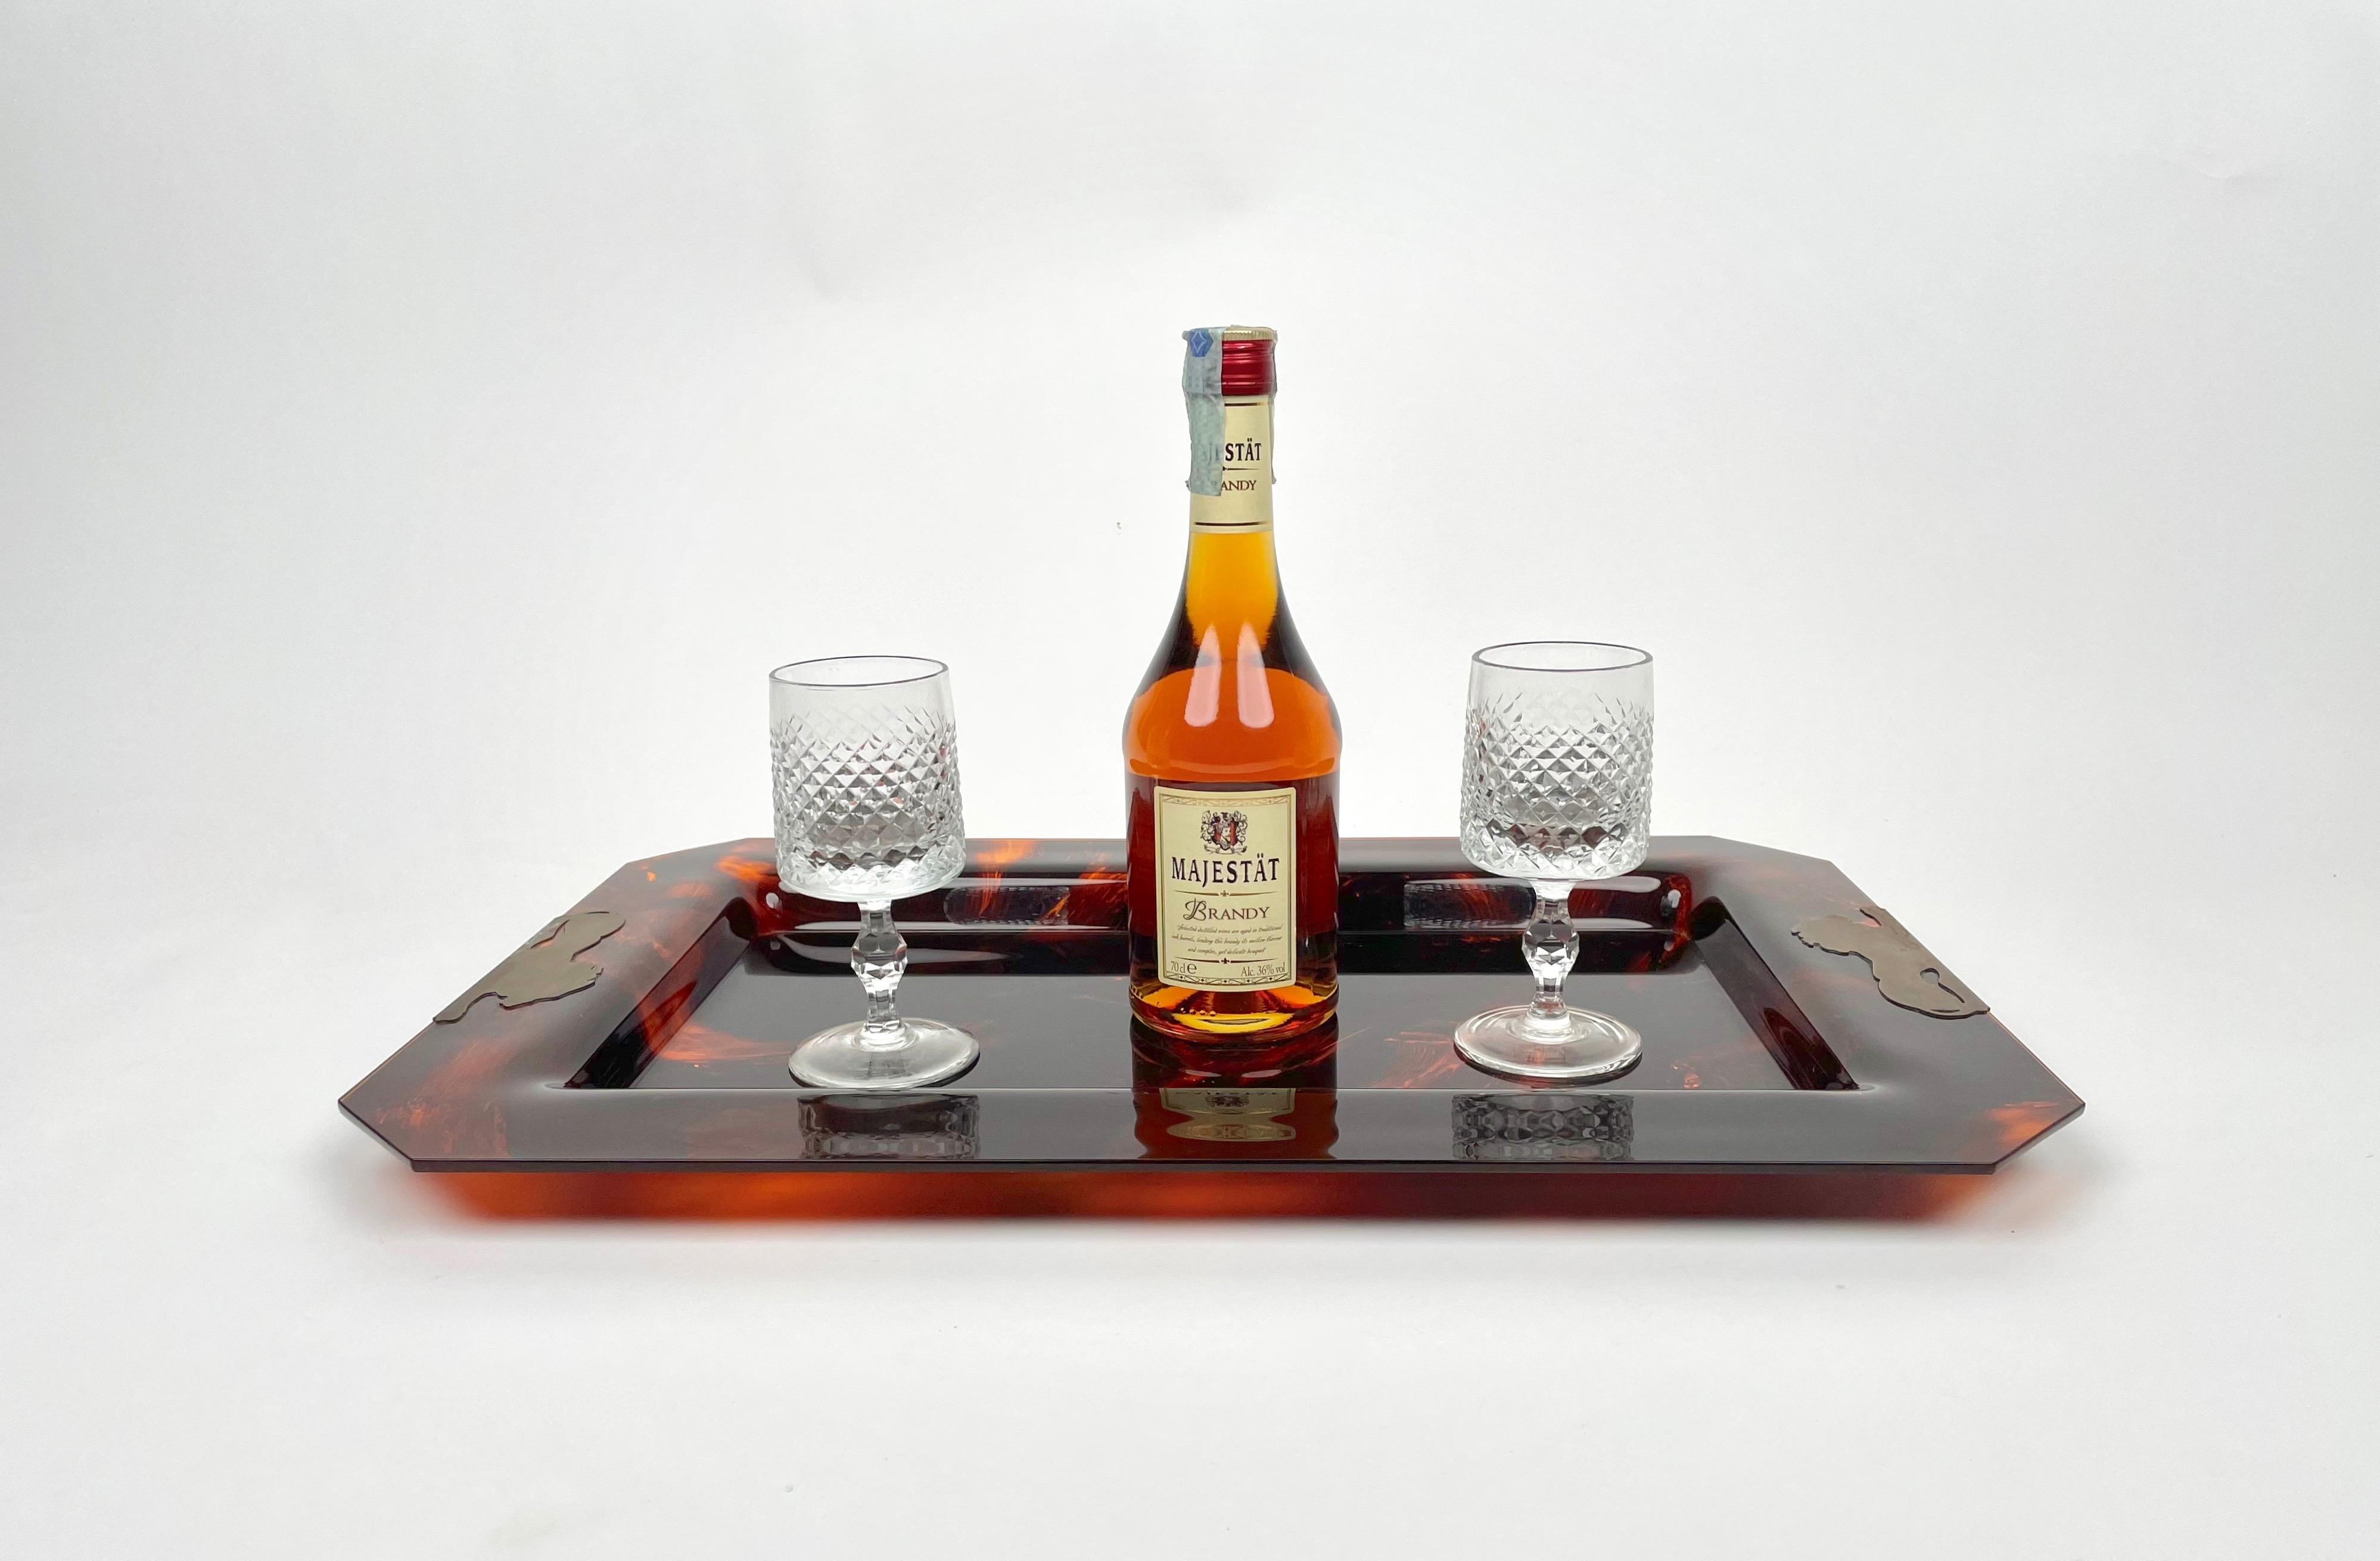 Metal Brass & Tortoise Shell Effect Lucite Centerpiece Serving Tray, Italy, 1970s